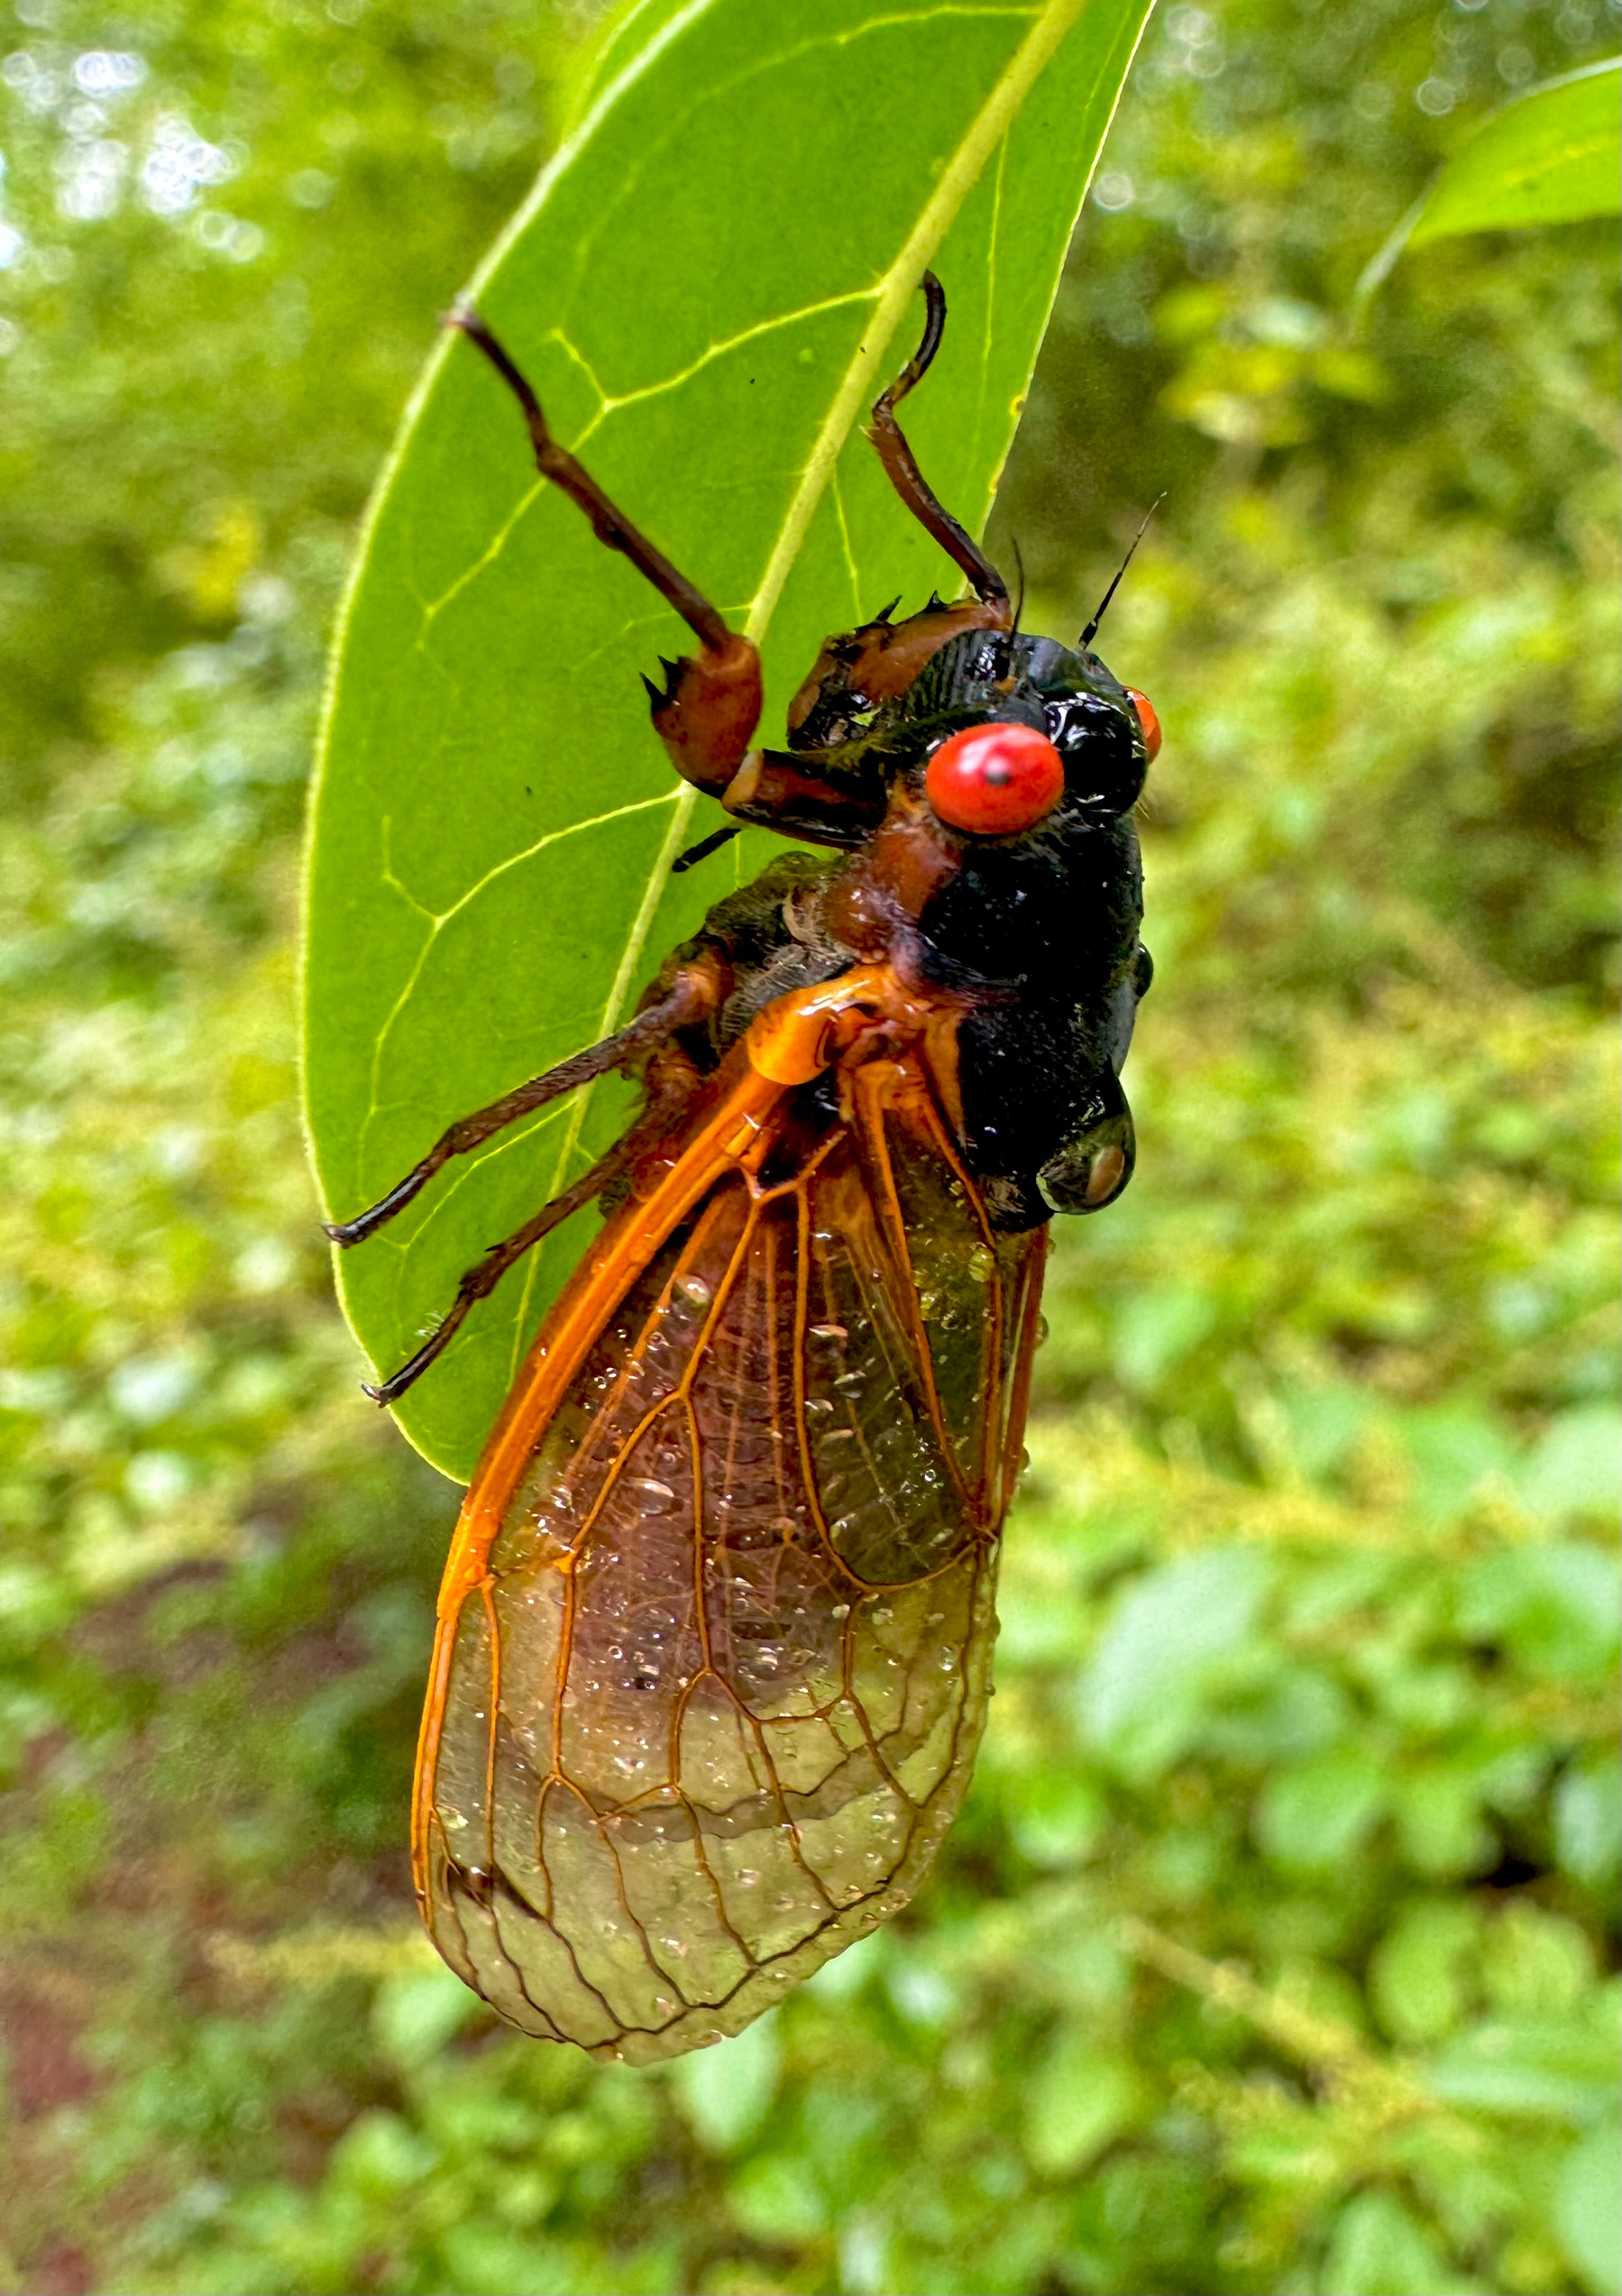 Cicada clinging to the underside of a leaf, showing red eyes, black body, and translucent wings with orange veins.